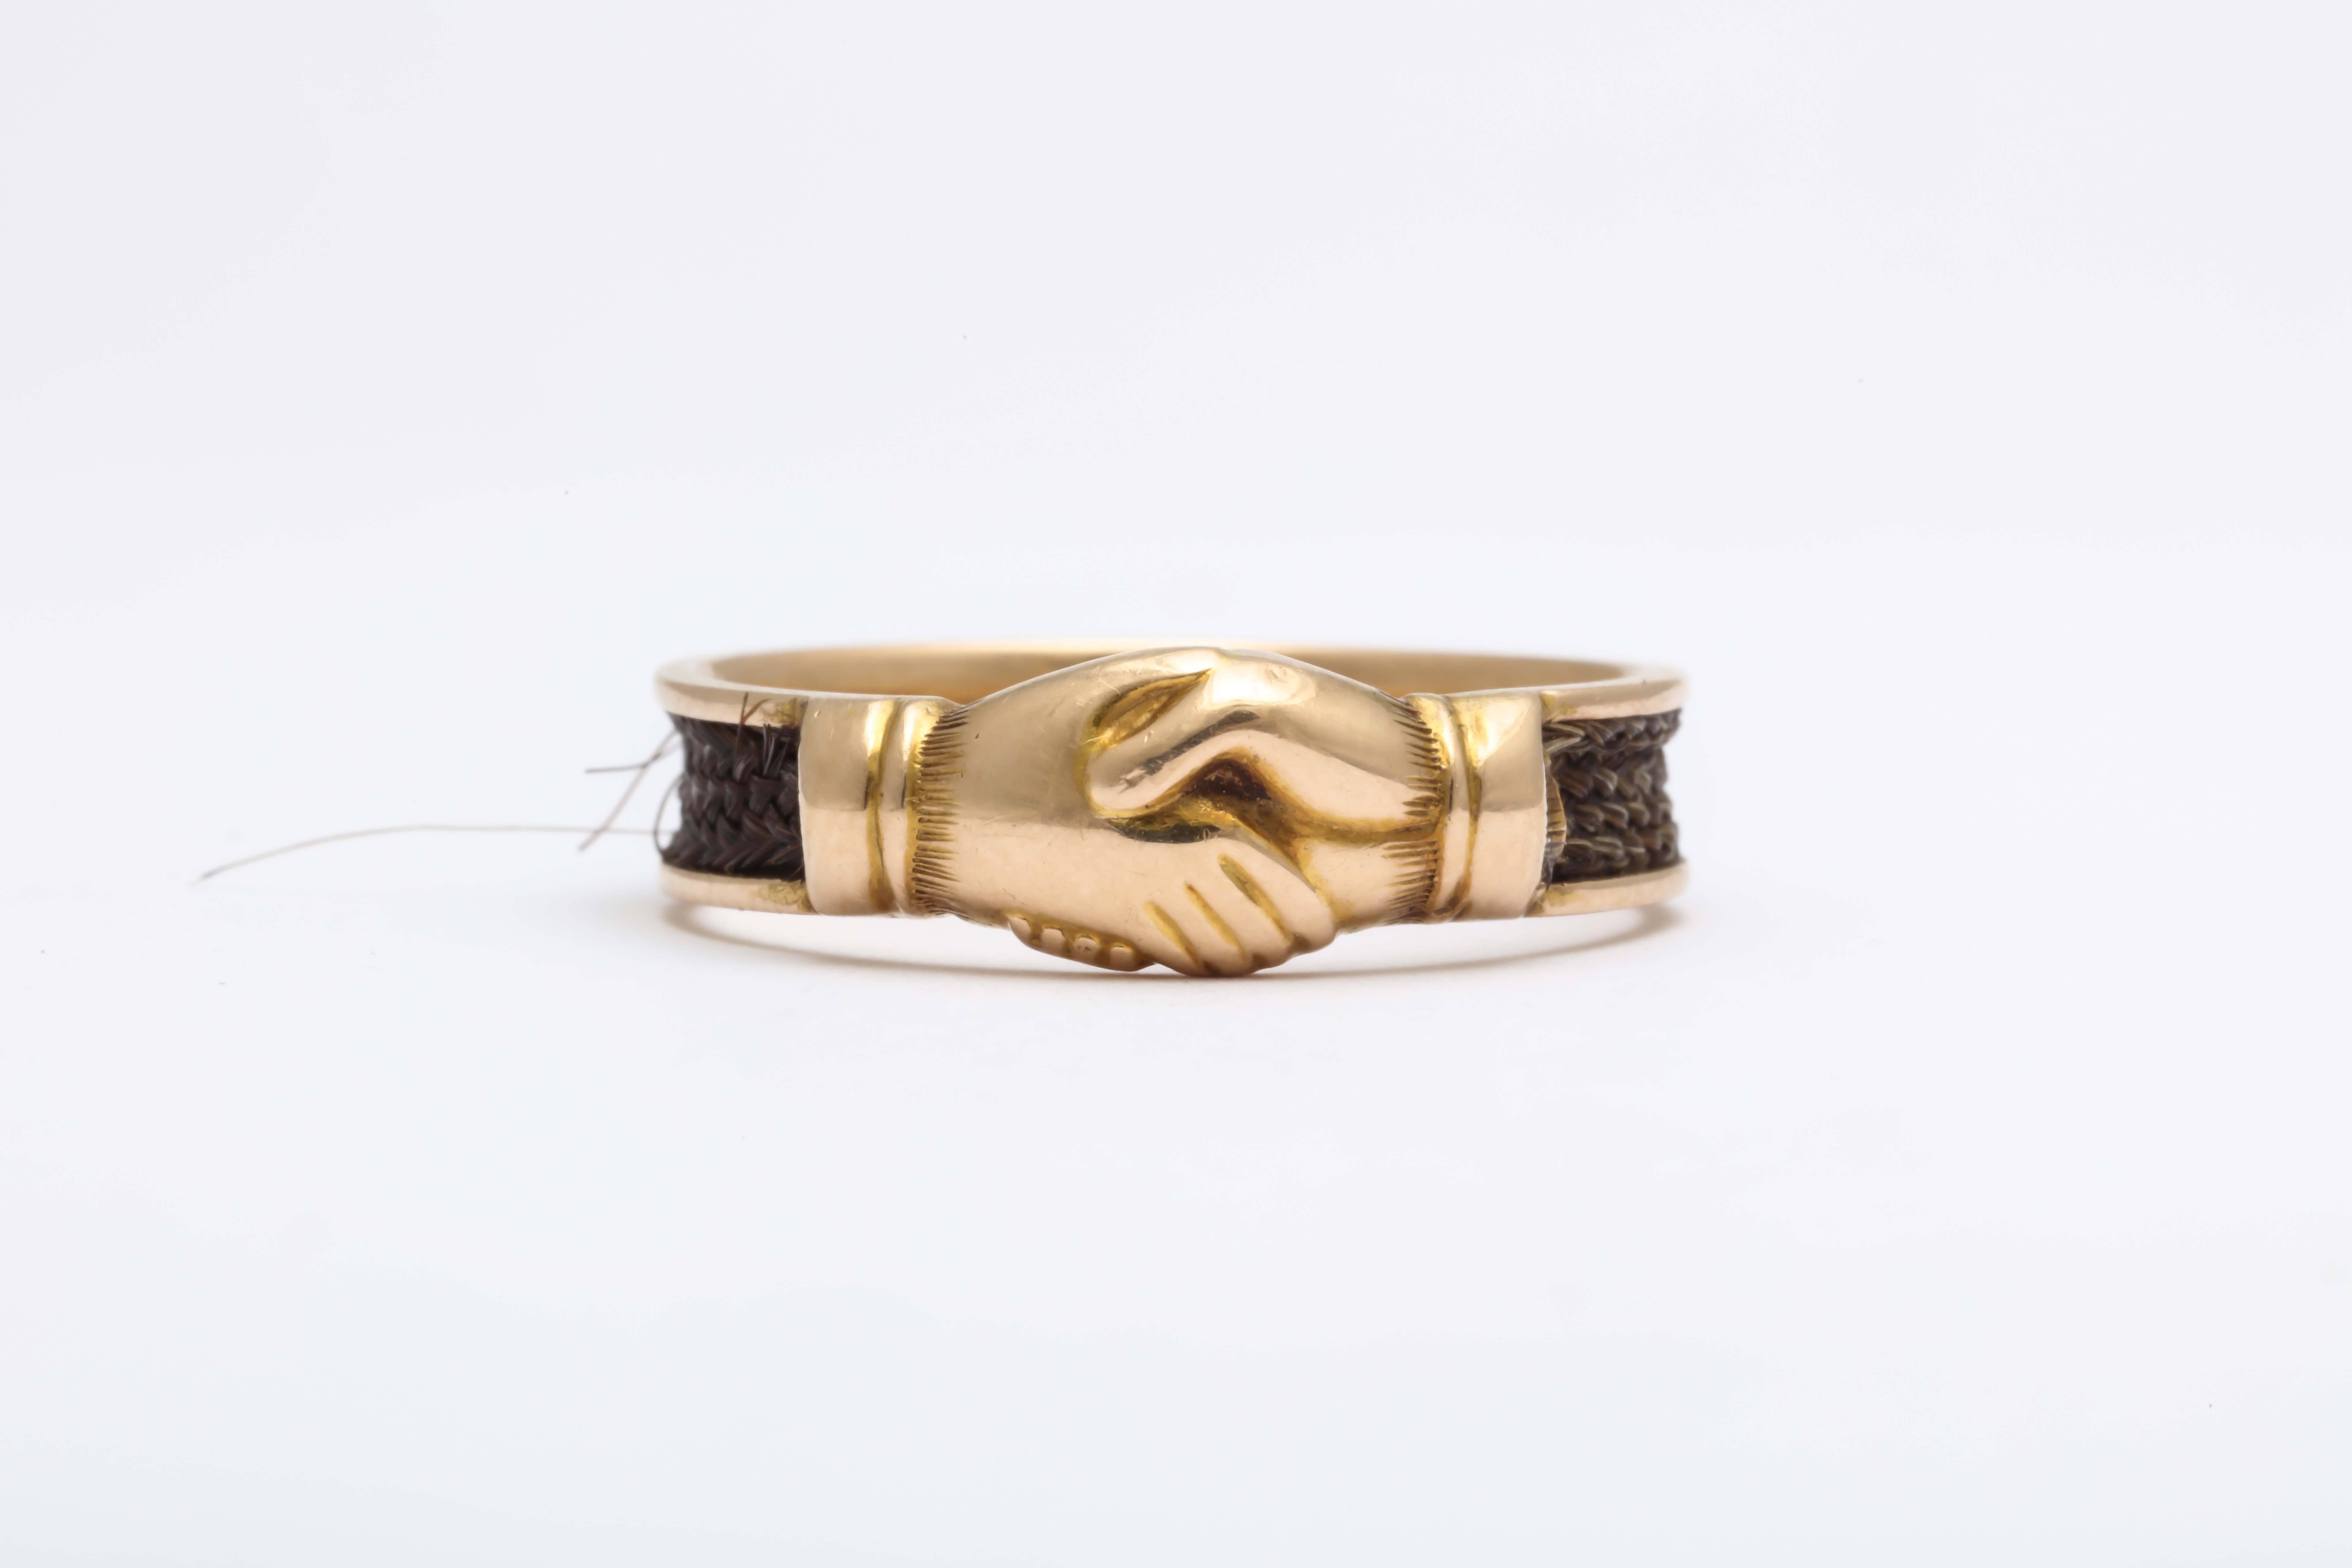 Fede rings- where two hands are clasped-have been popular for centuries. The hands can symbolize both love and friendship. This lovely English one is in 15kt and was a memorial ring for a loved one. Inside it is engraved C. W. died Dec. 10th 1868.